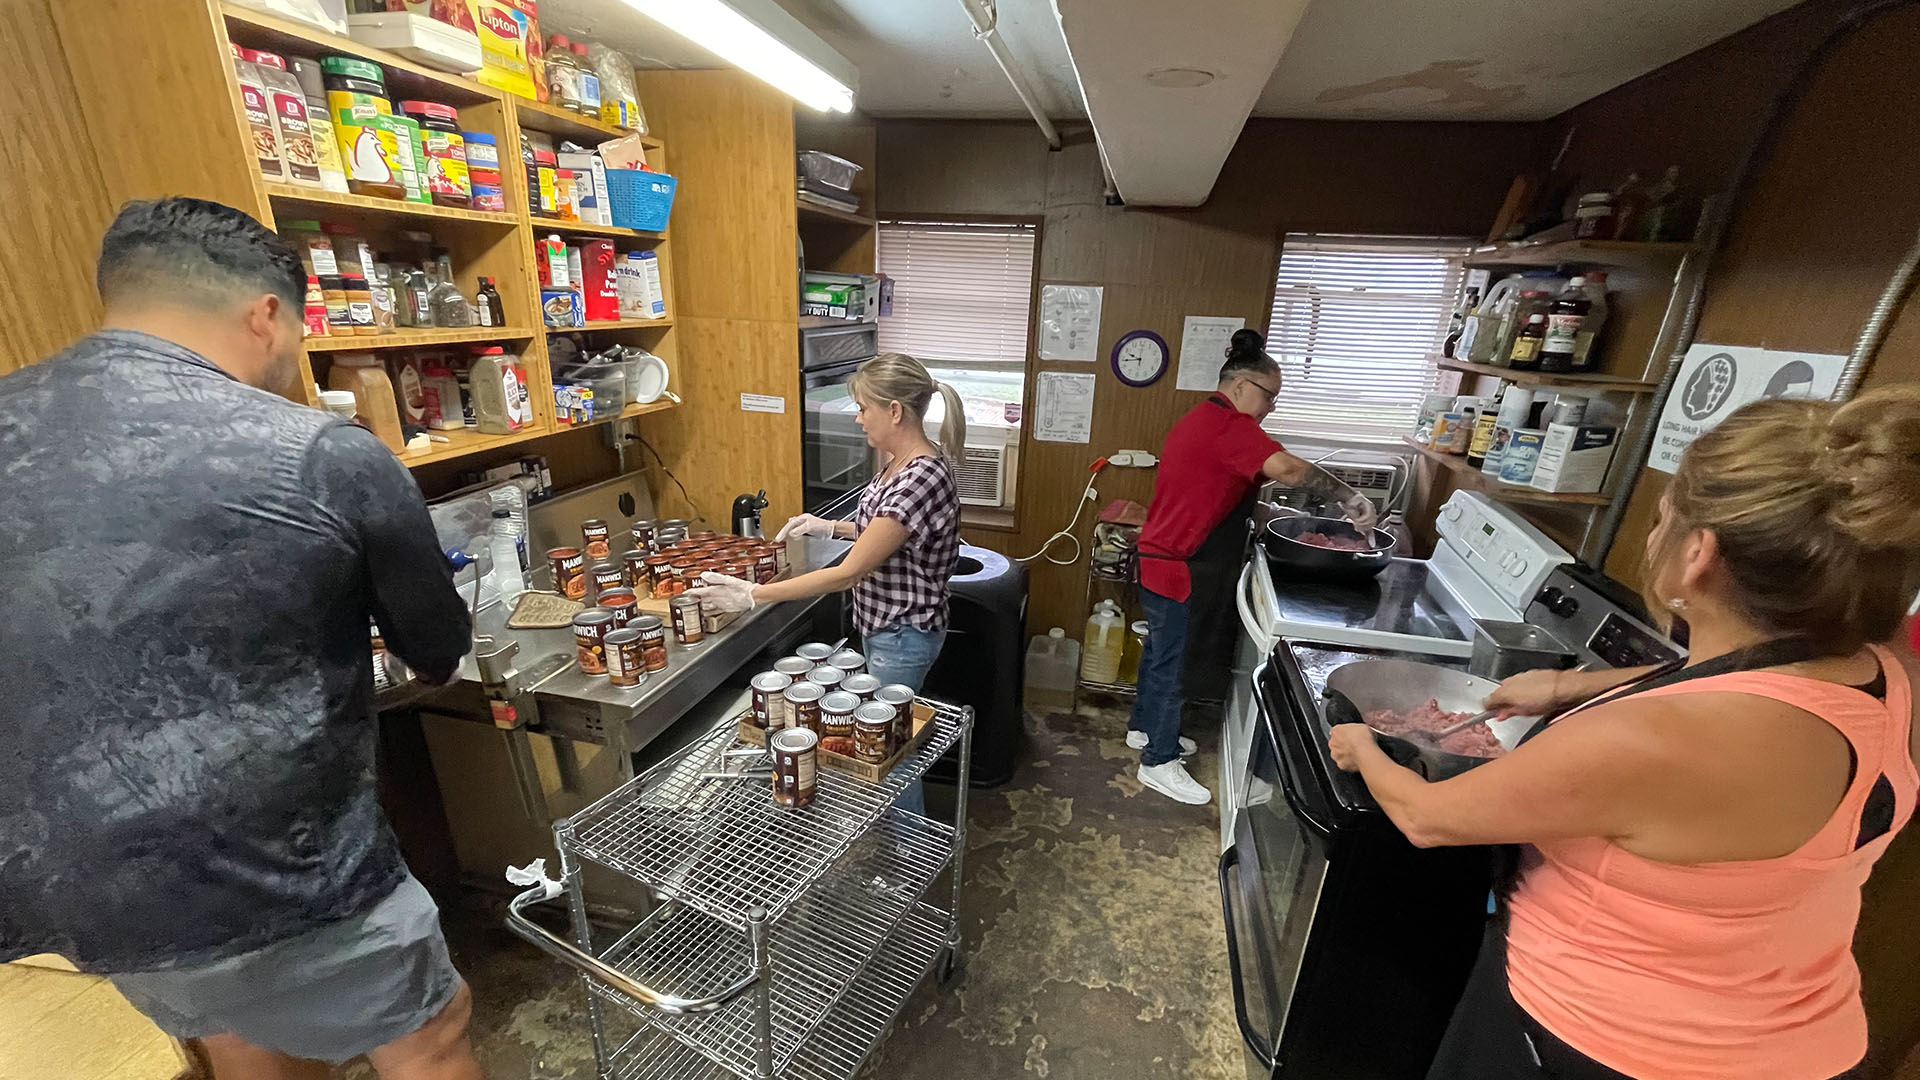 Featured image for “Fathom Central Texas Serves Those in Need”